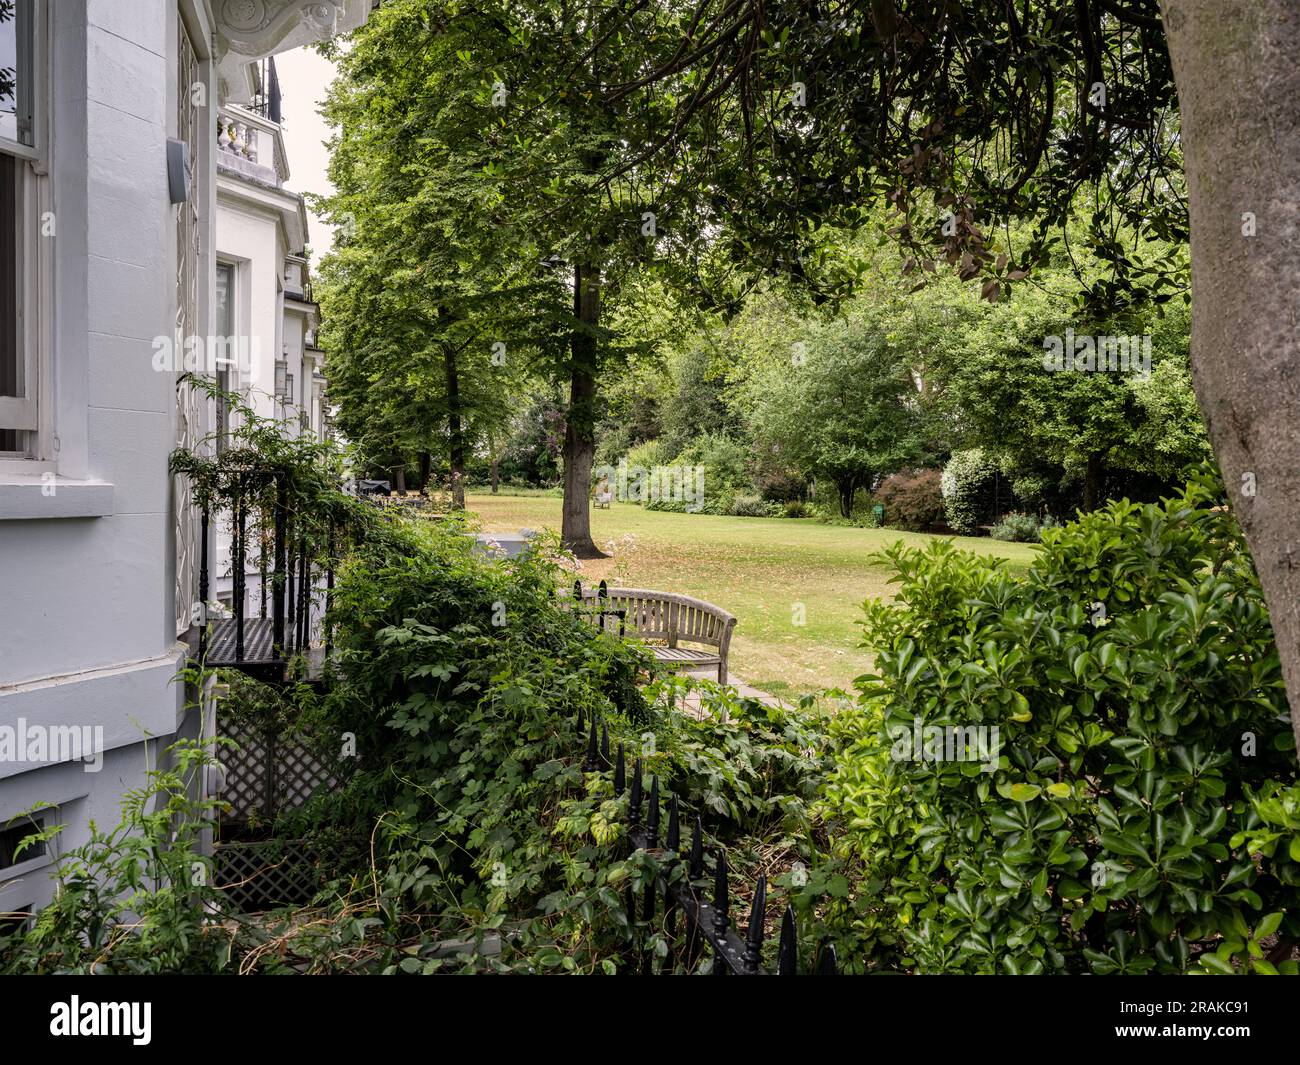 Onslow Gardens, South Kensington, London UK; a typical communal locked garden for well-off residents Stock Photo